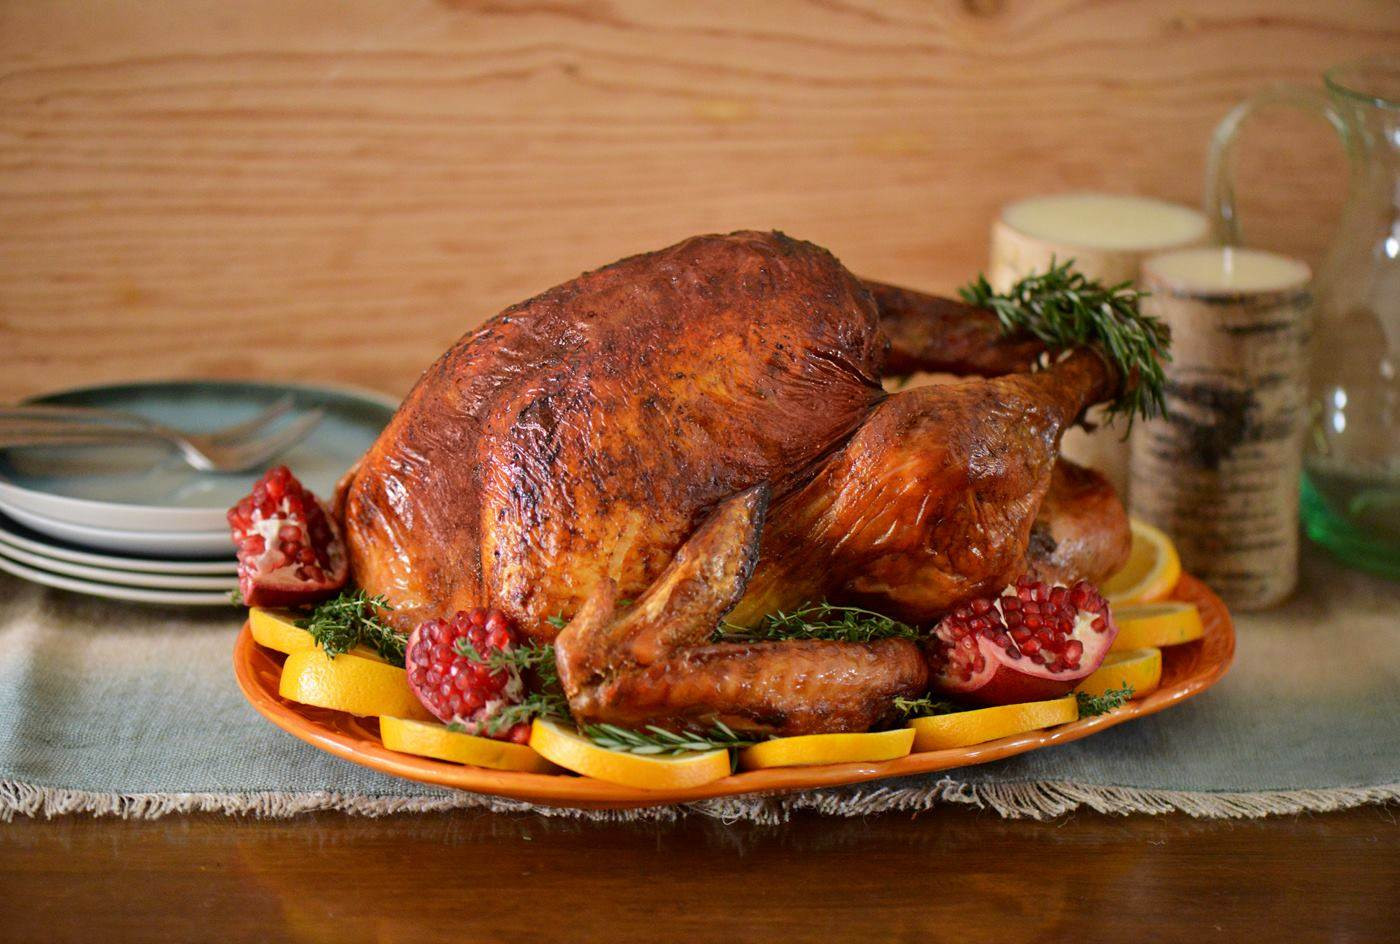 Picture Of Thanksgiving Turkey
 5 Latina Chefs Delicious Holiday Recipes NBC News